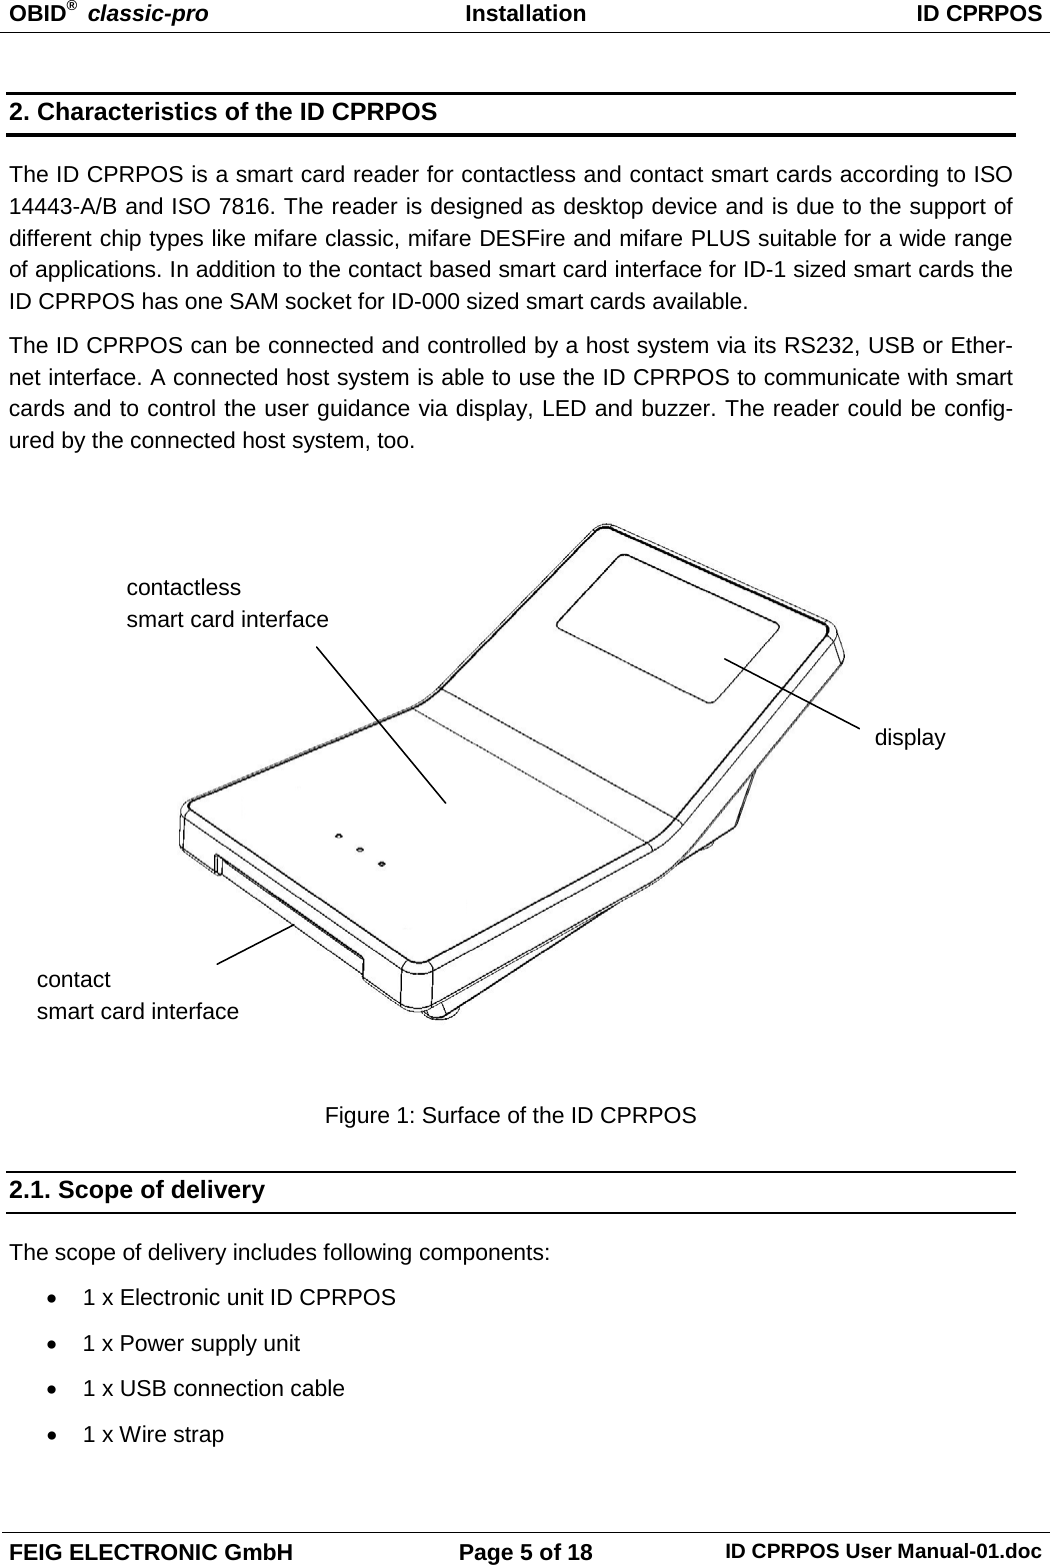 OBID®  classic-pro Installation ID CPRPOS  FEIG ELECTRONIC GmbH Page 5 of 18 ID CPRPOS User Manual-01.doc  2. Characteristics of the ID CPRPOS The ID CPRPOS is a smart card reader for contactless and contact smart cards according to ISO 14443-A/B and ISO 7816. The reader is designed as desktop device and is due to the support of different chip types like mifare classic, mifare DESFire and mifare PLUS suitable for a wide range of applications. In addition to the contact based smart card interface for ID-1 sized smart cards the ID CPRPOS has one SAM socket for ID-000 sized smart cards available. The ID CPRPOS can be connected and controlled by a host system via its RS232, USB or Ether-net interface. A connected host system is able to use the ID CPRPOS to communicate with smart cards and to control the user guidance via display, LED and buzzer. The reader could be config-ured by the connected host system, too.    Figure 1: Surface of the ID CPRPOS 2.1. Scope of delivery The scope of delivery includes following components: • 1 x Electronic unit ID CPRPOS • 1 x Power supply unit • 1 x USB connection cable • 1 x Wire strap  display contact smart card interface contactless smart card interface 